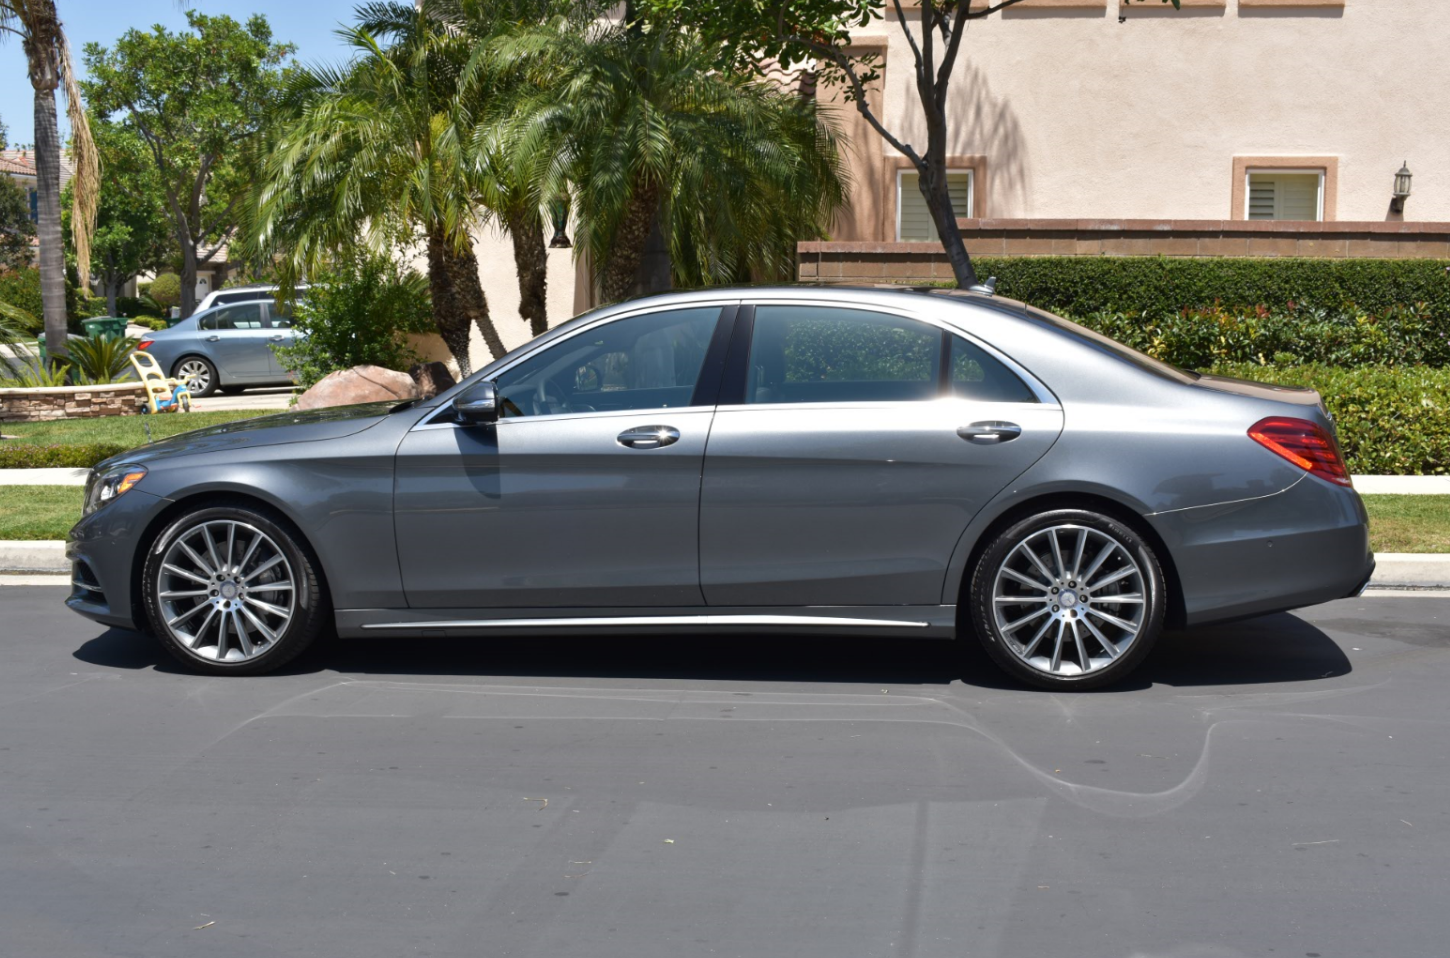 2017 Mercedes-Benz S550 - LIKE NEW 2017 MERCEDES-BENZ S550  (MOTIVATED SELLER) - Used - VIN WDDUG8CB0HA317443 - 685 Miles - 8 cyl - 4WD - Automatic - Sedan - Gray - Irvine, CA 92620, United States